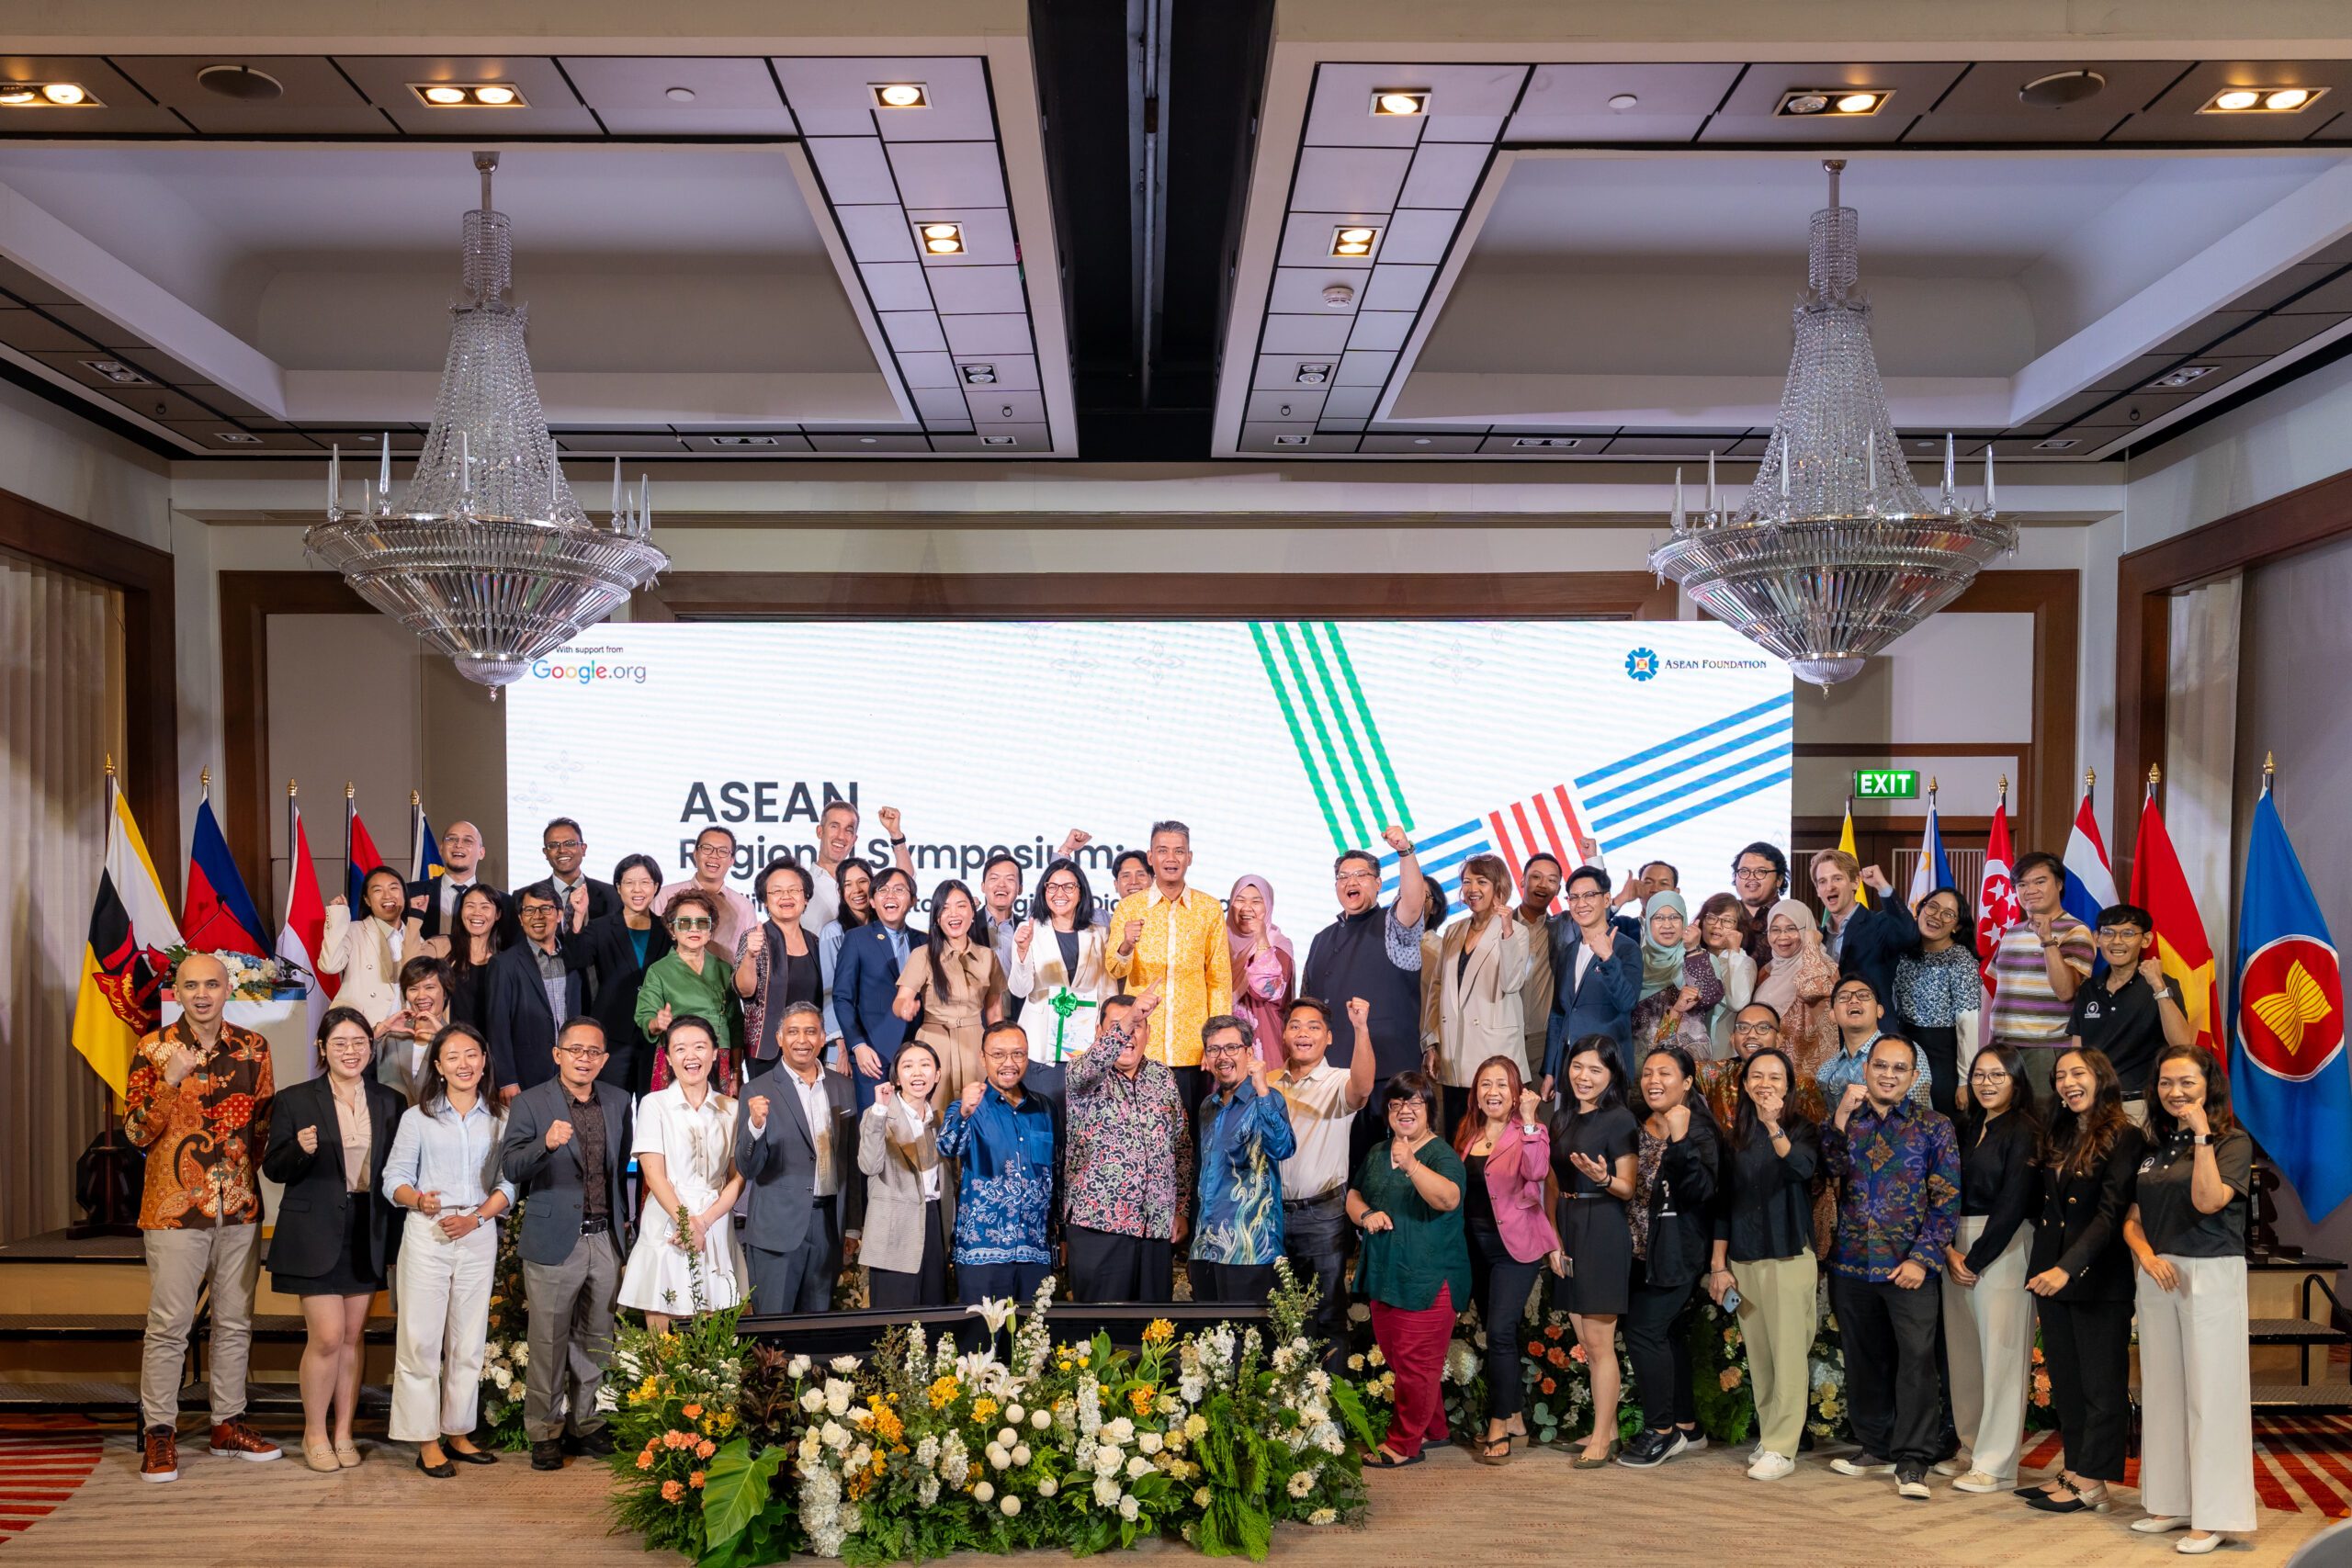 ASEAN Foundation Unveils Research Findings on Digital Literacy, Spotlighting the Digital Divide Across the Region